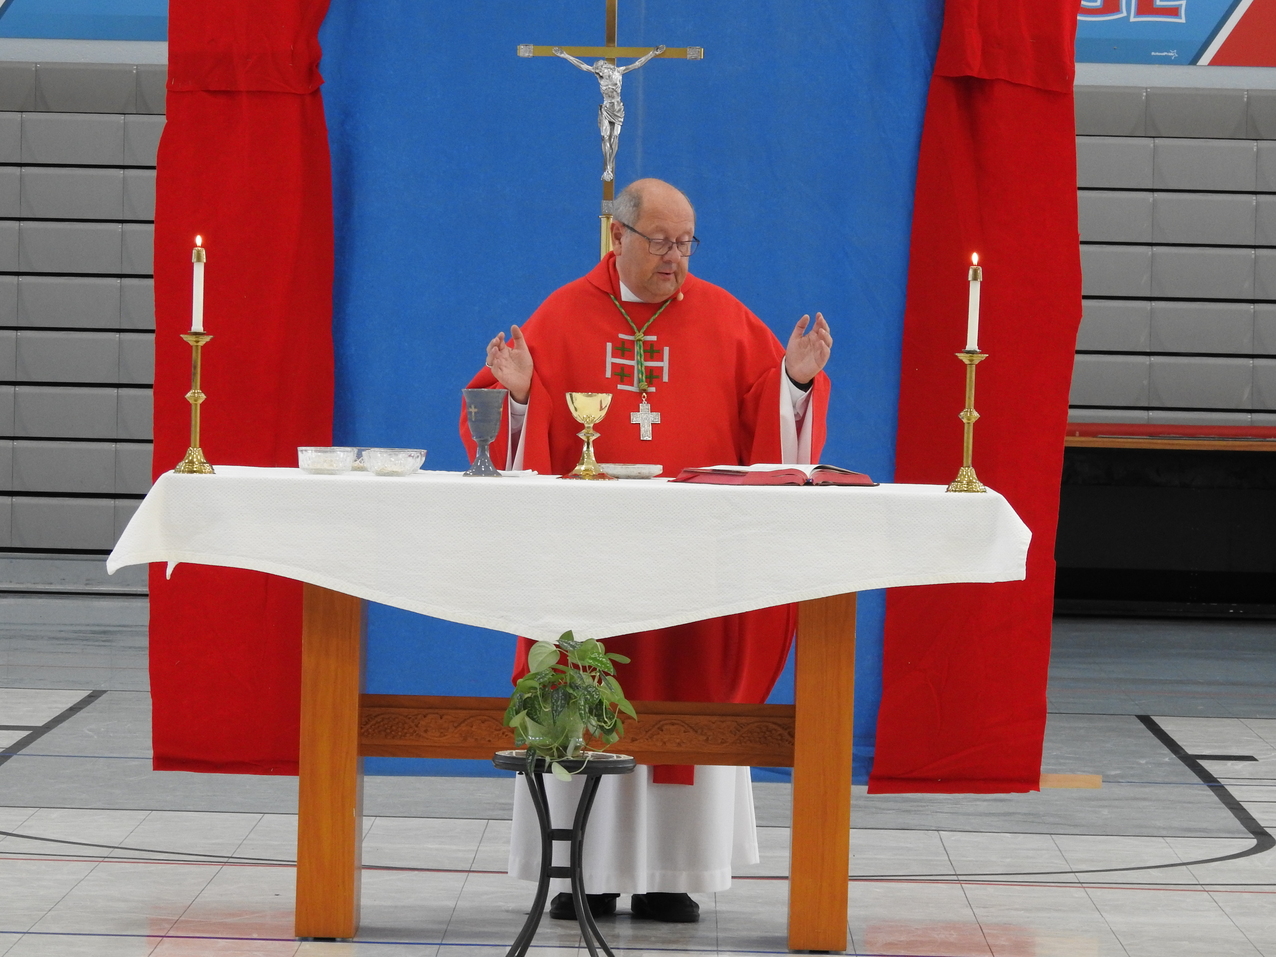 ‘Time is a gift,’ use it wisely, bishop tells VASJ community